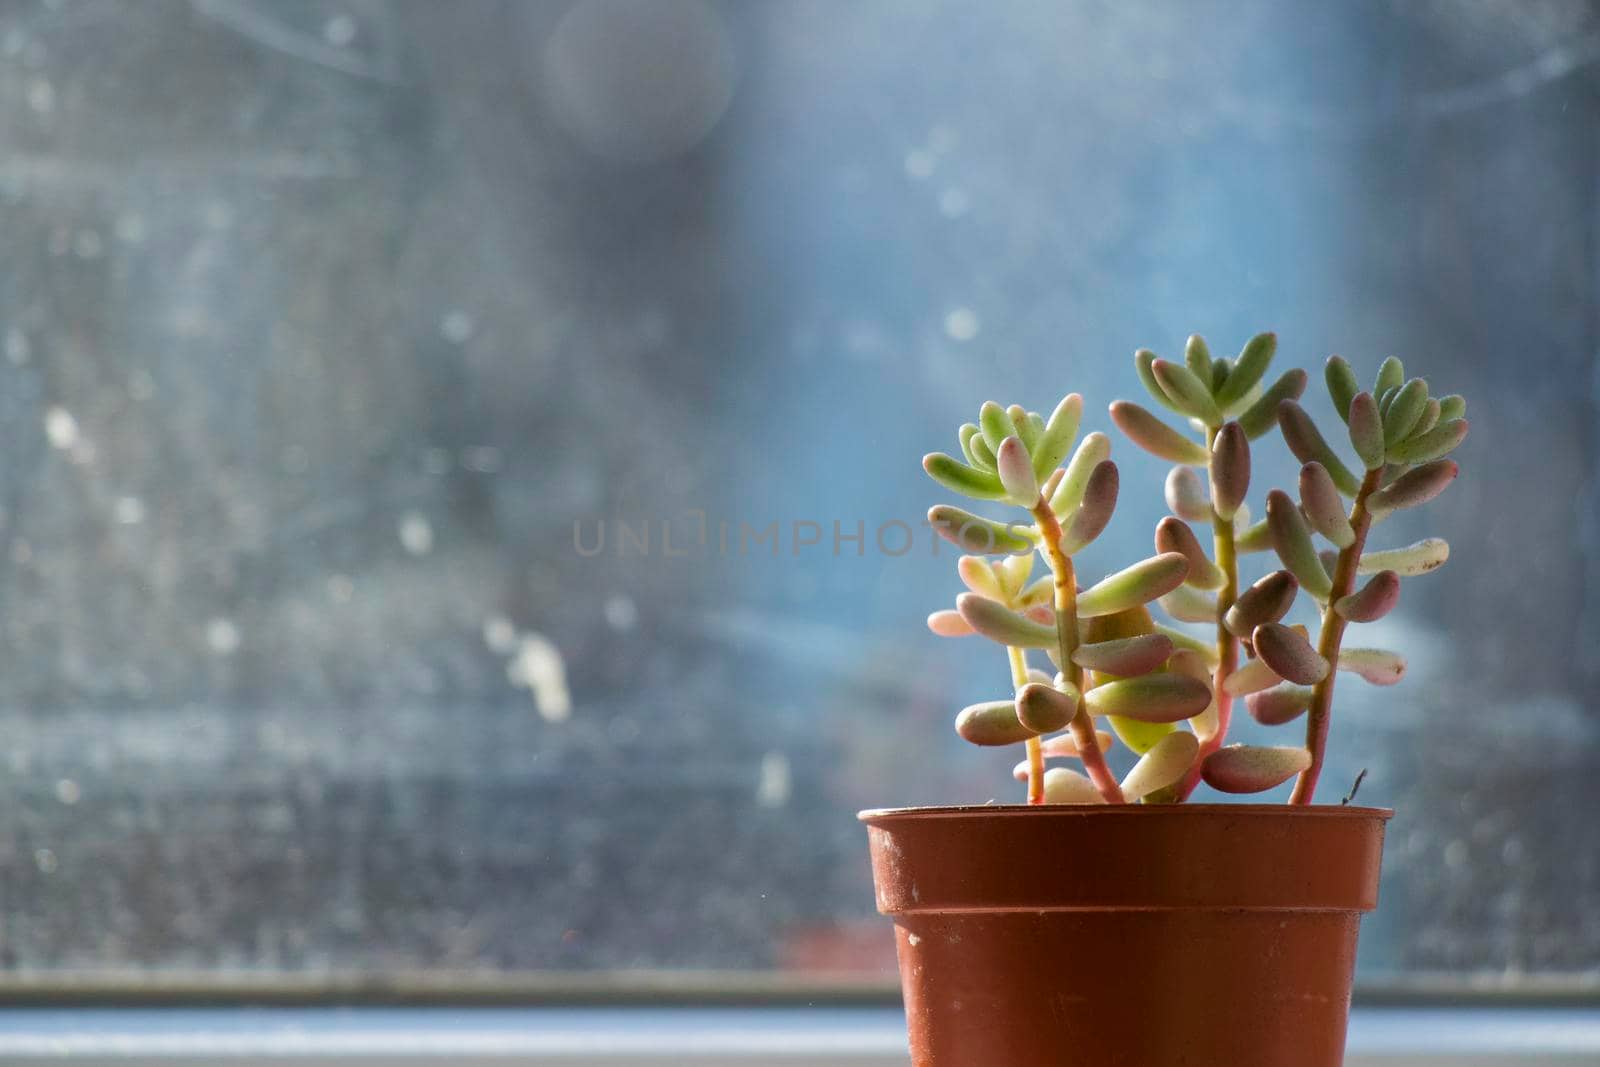 Succulent on the window, sunlight and close-up by Taidundua